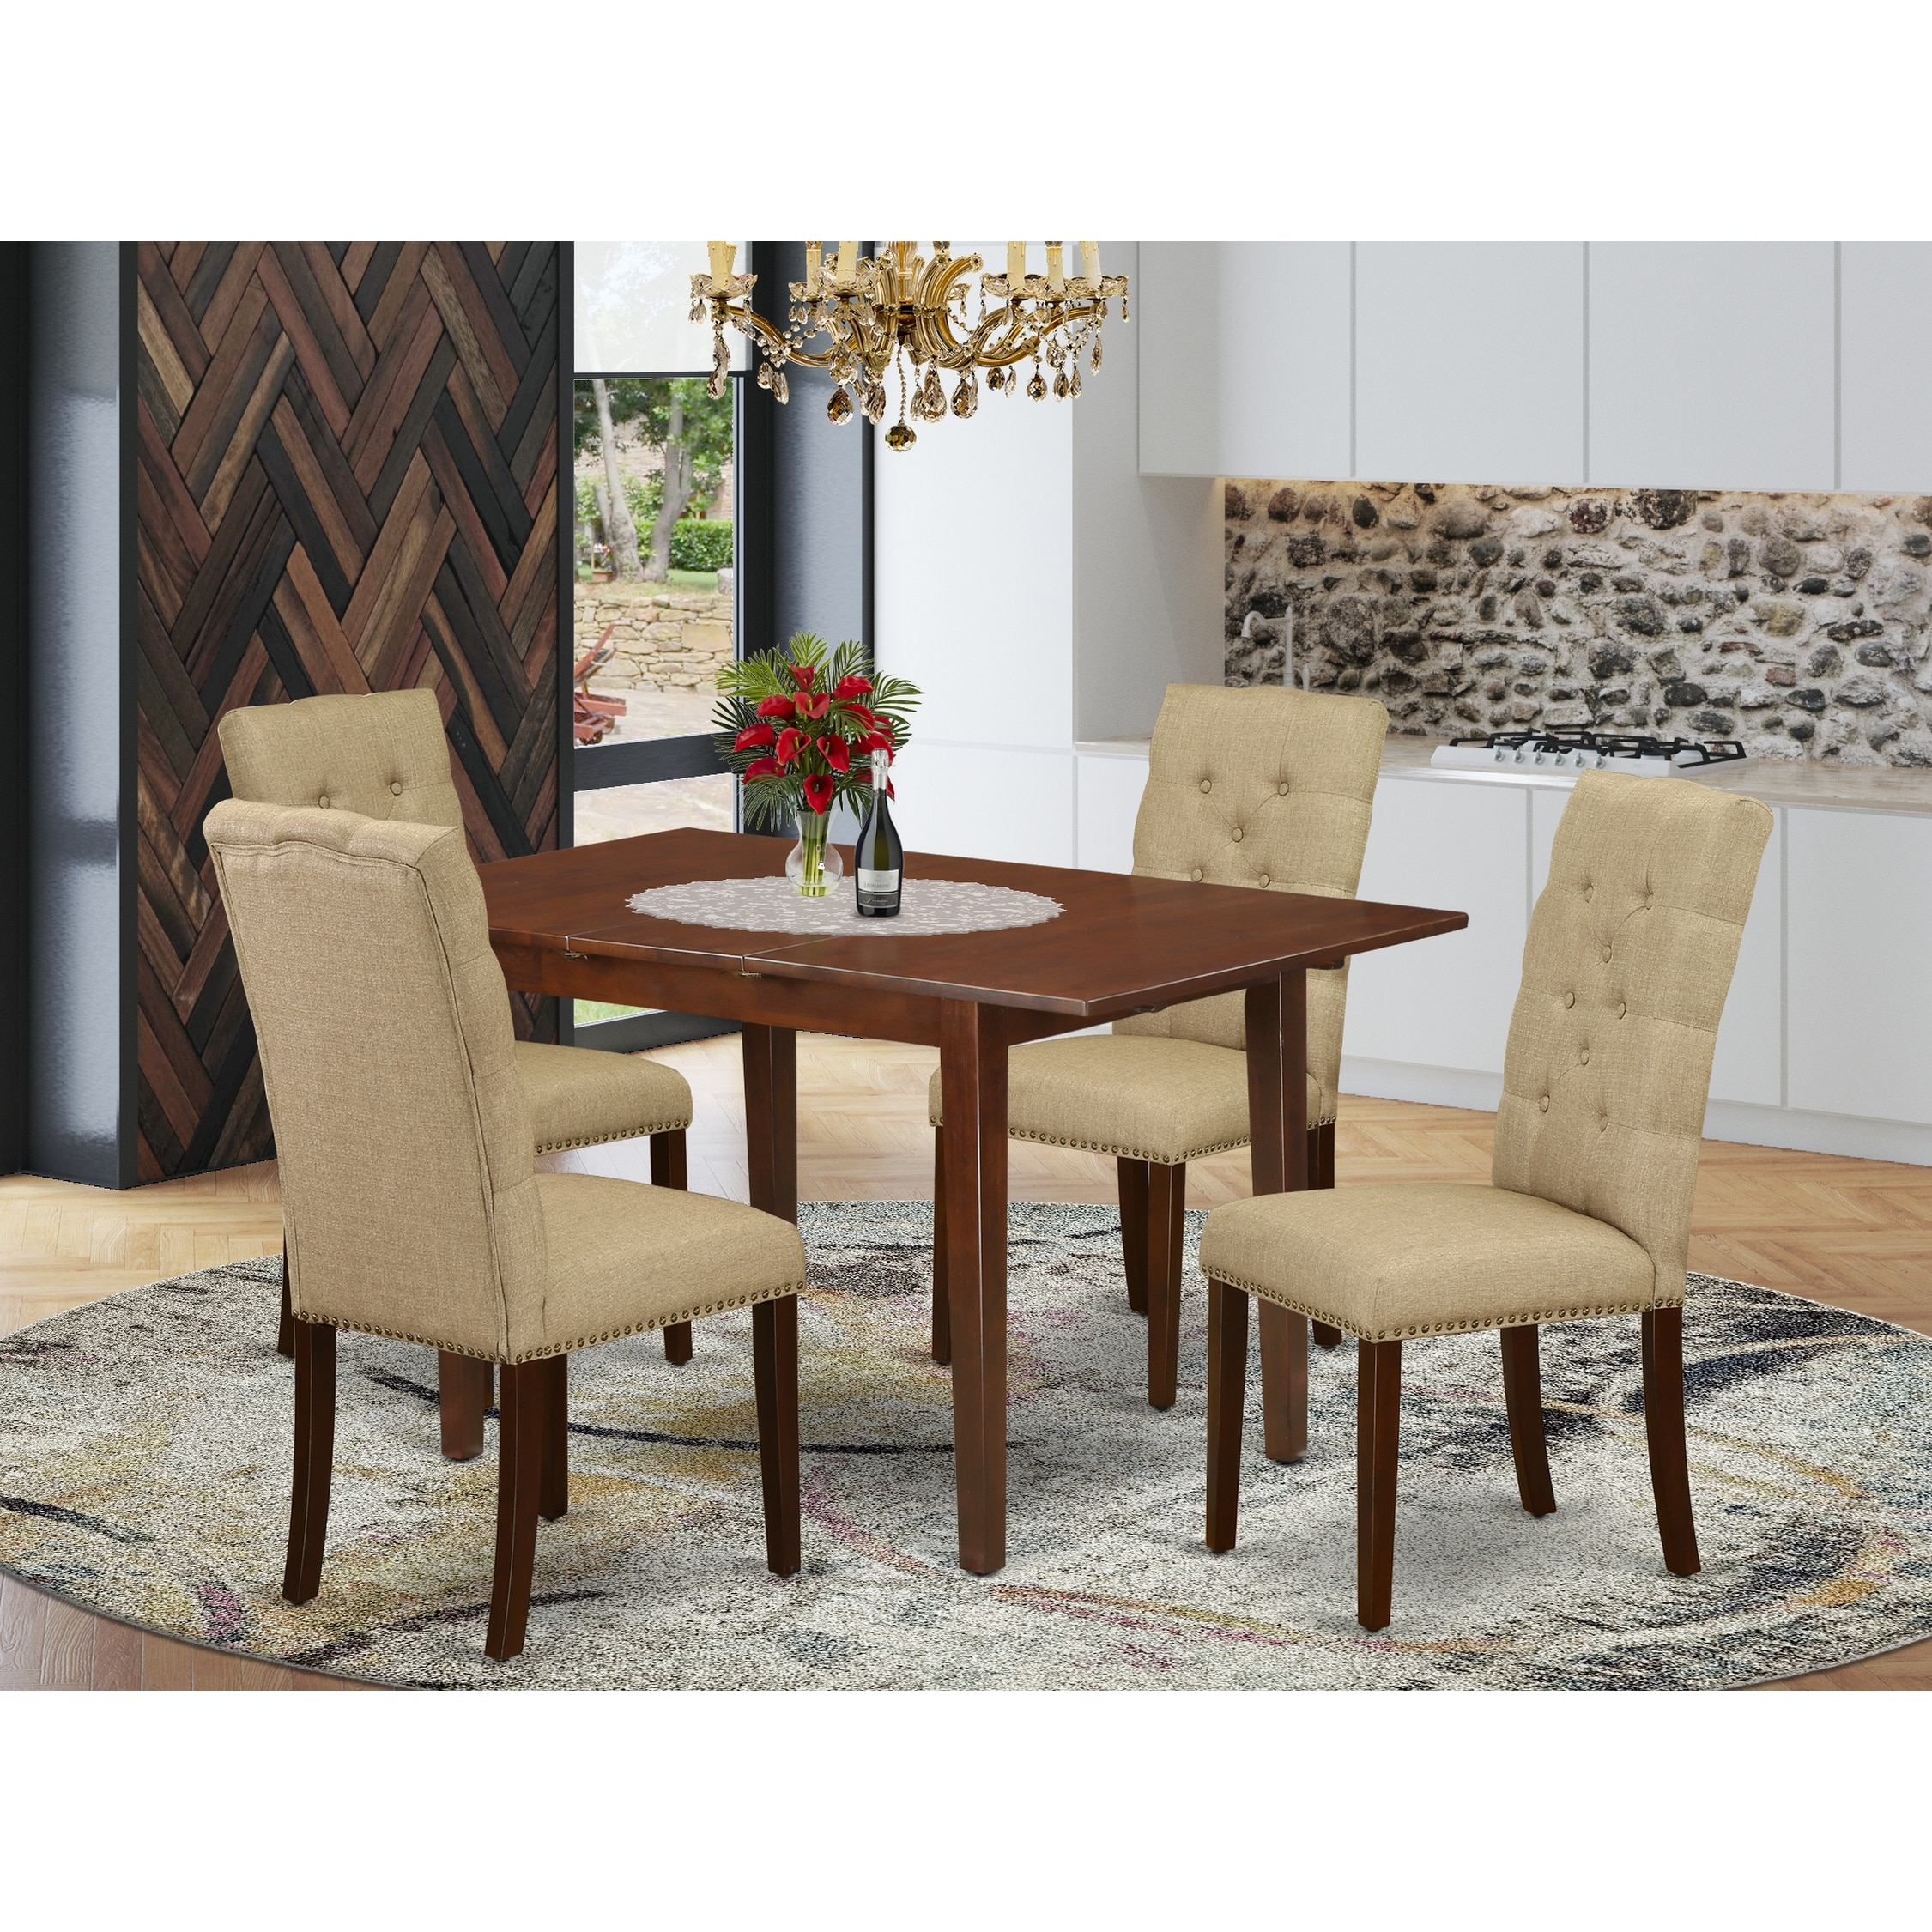 Psel5 Mah 16 5 Pc Dining Room Table Set 4 Kitchen Parson Chair And 2 Drops Leaf Wood Dining Table High Back Mahogany Finish Overstock 32085505